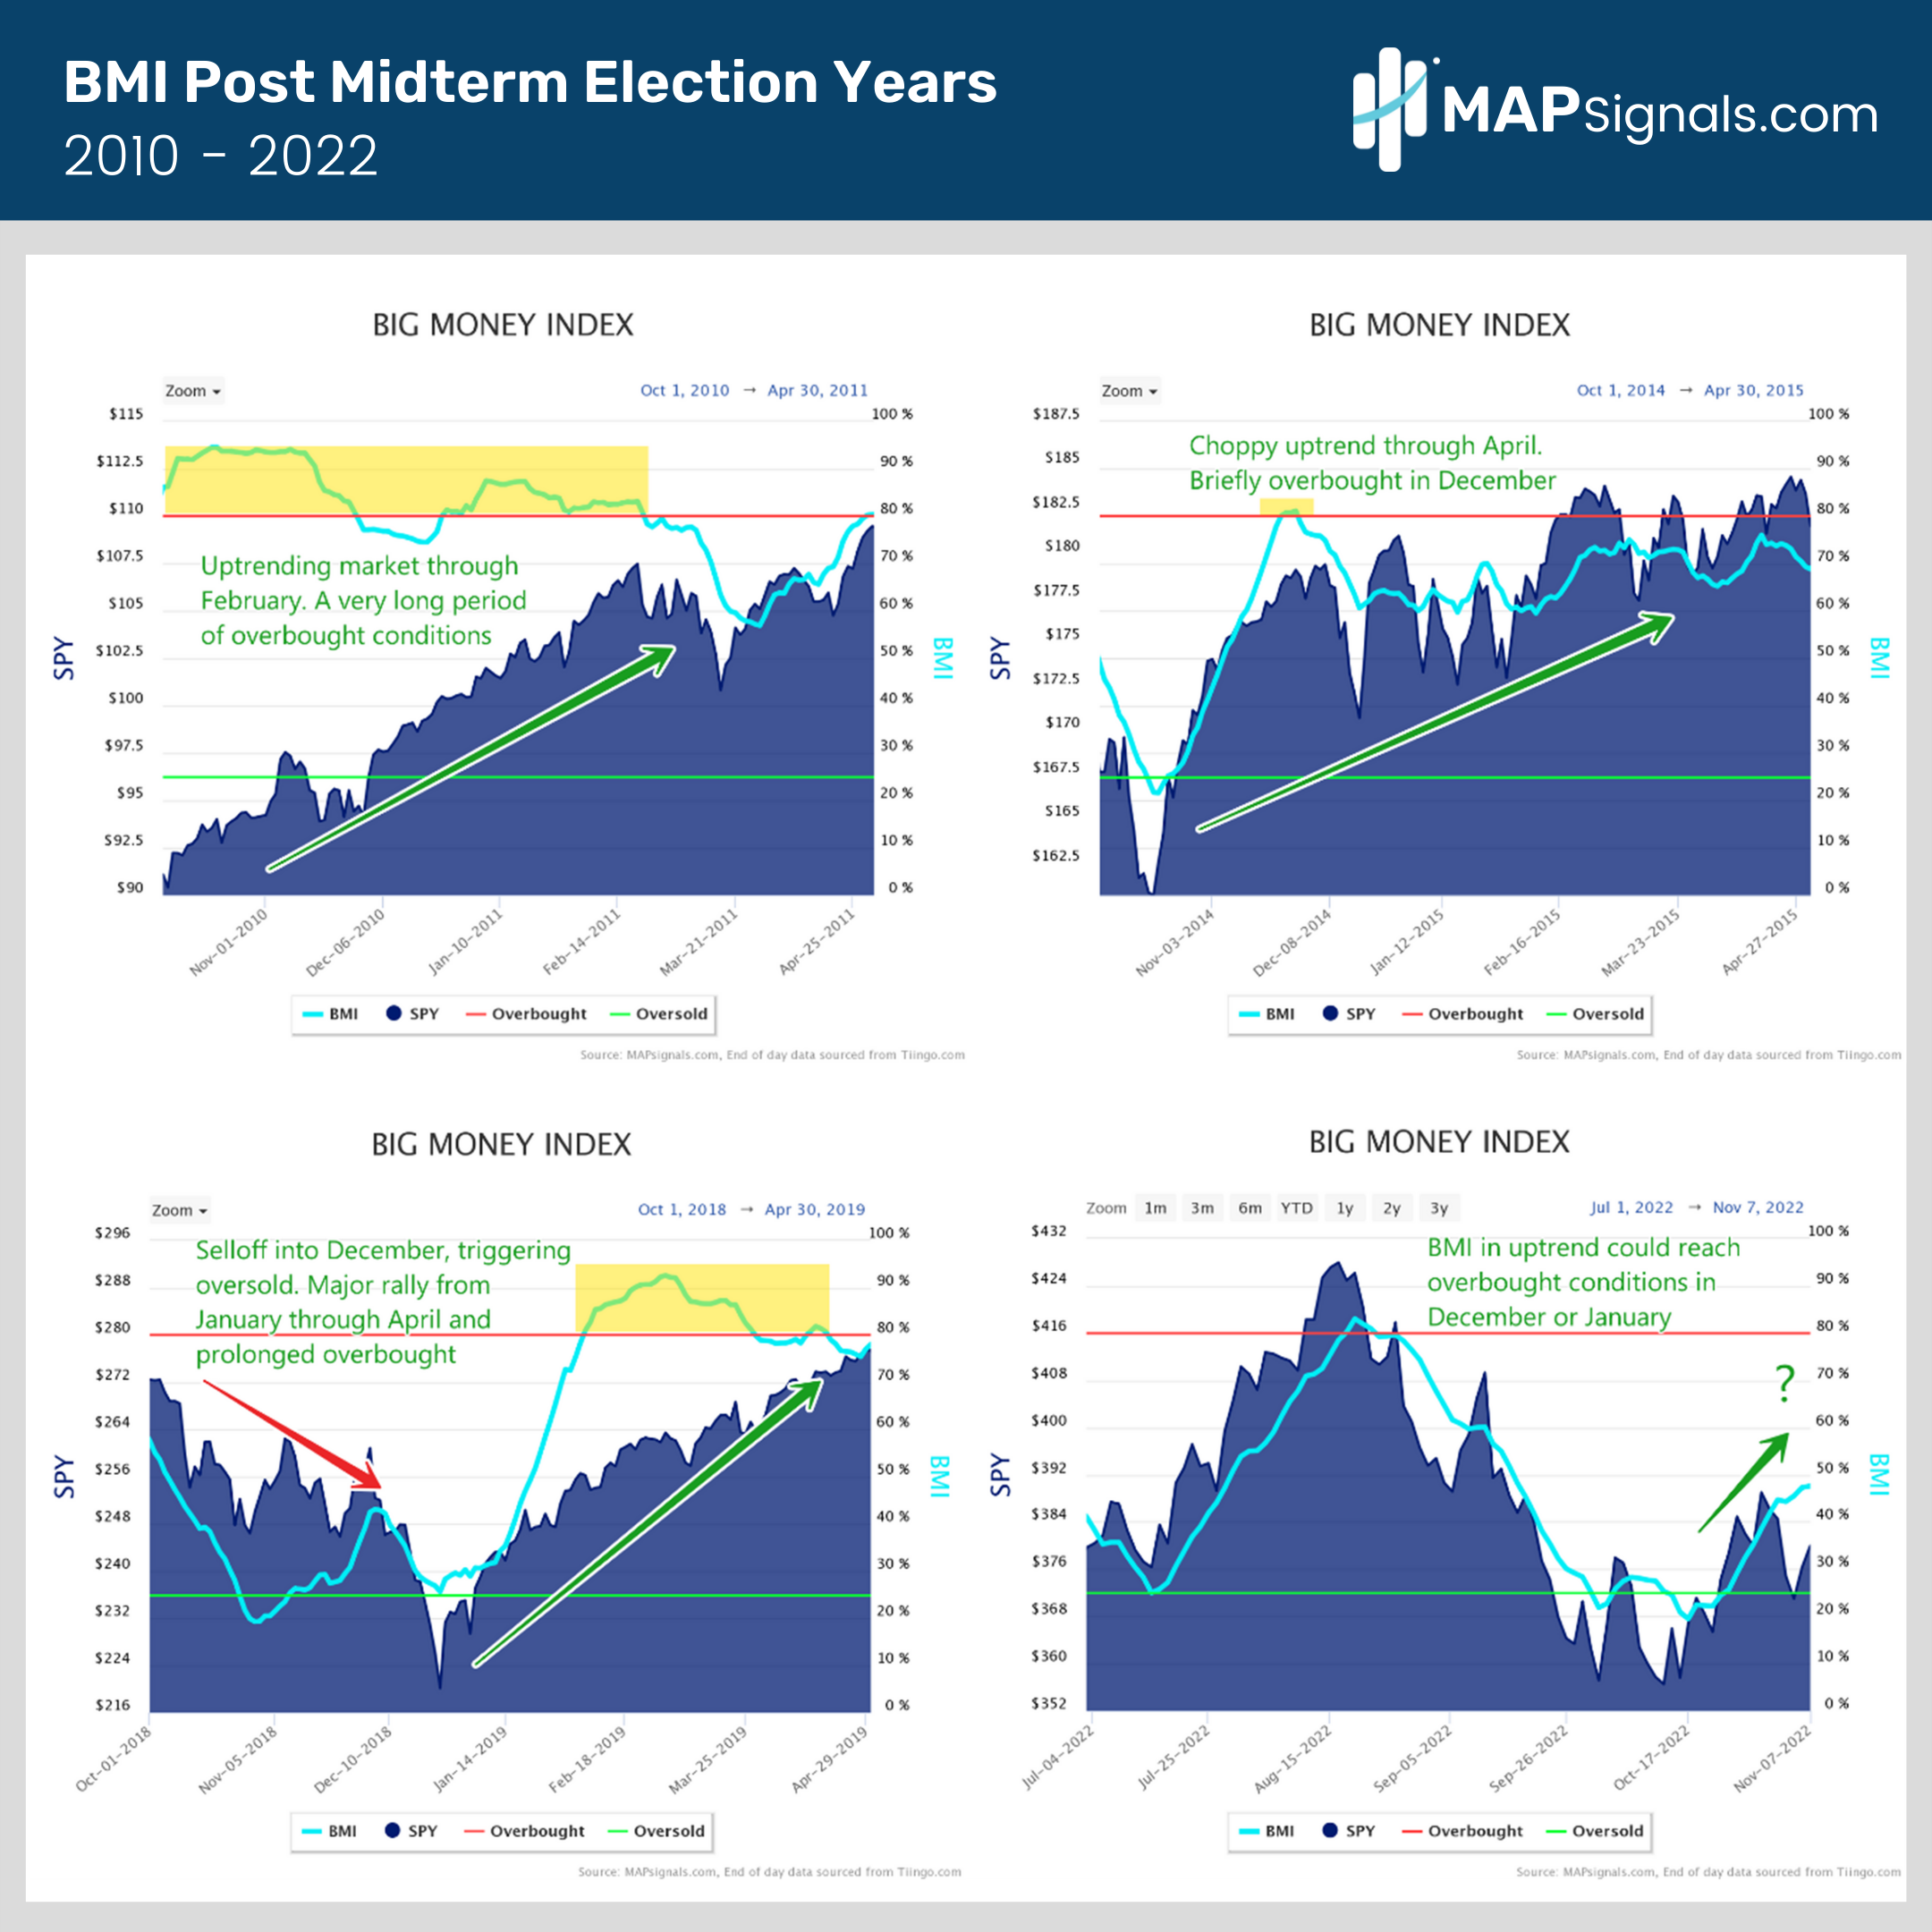 BMI Post Midterm Election Years 2010 - 2022 | MAPsignals